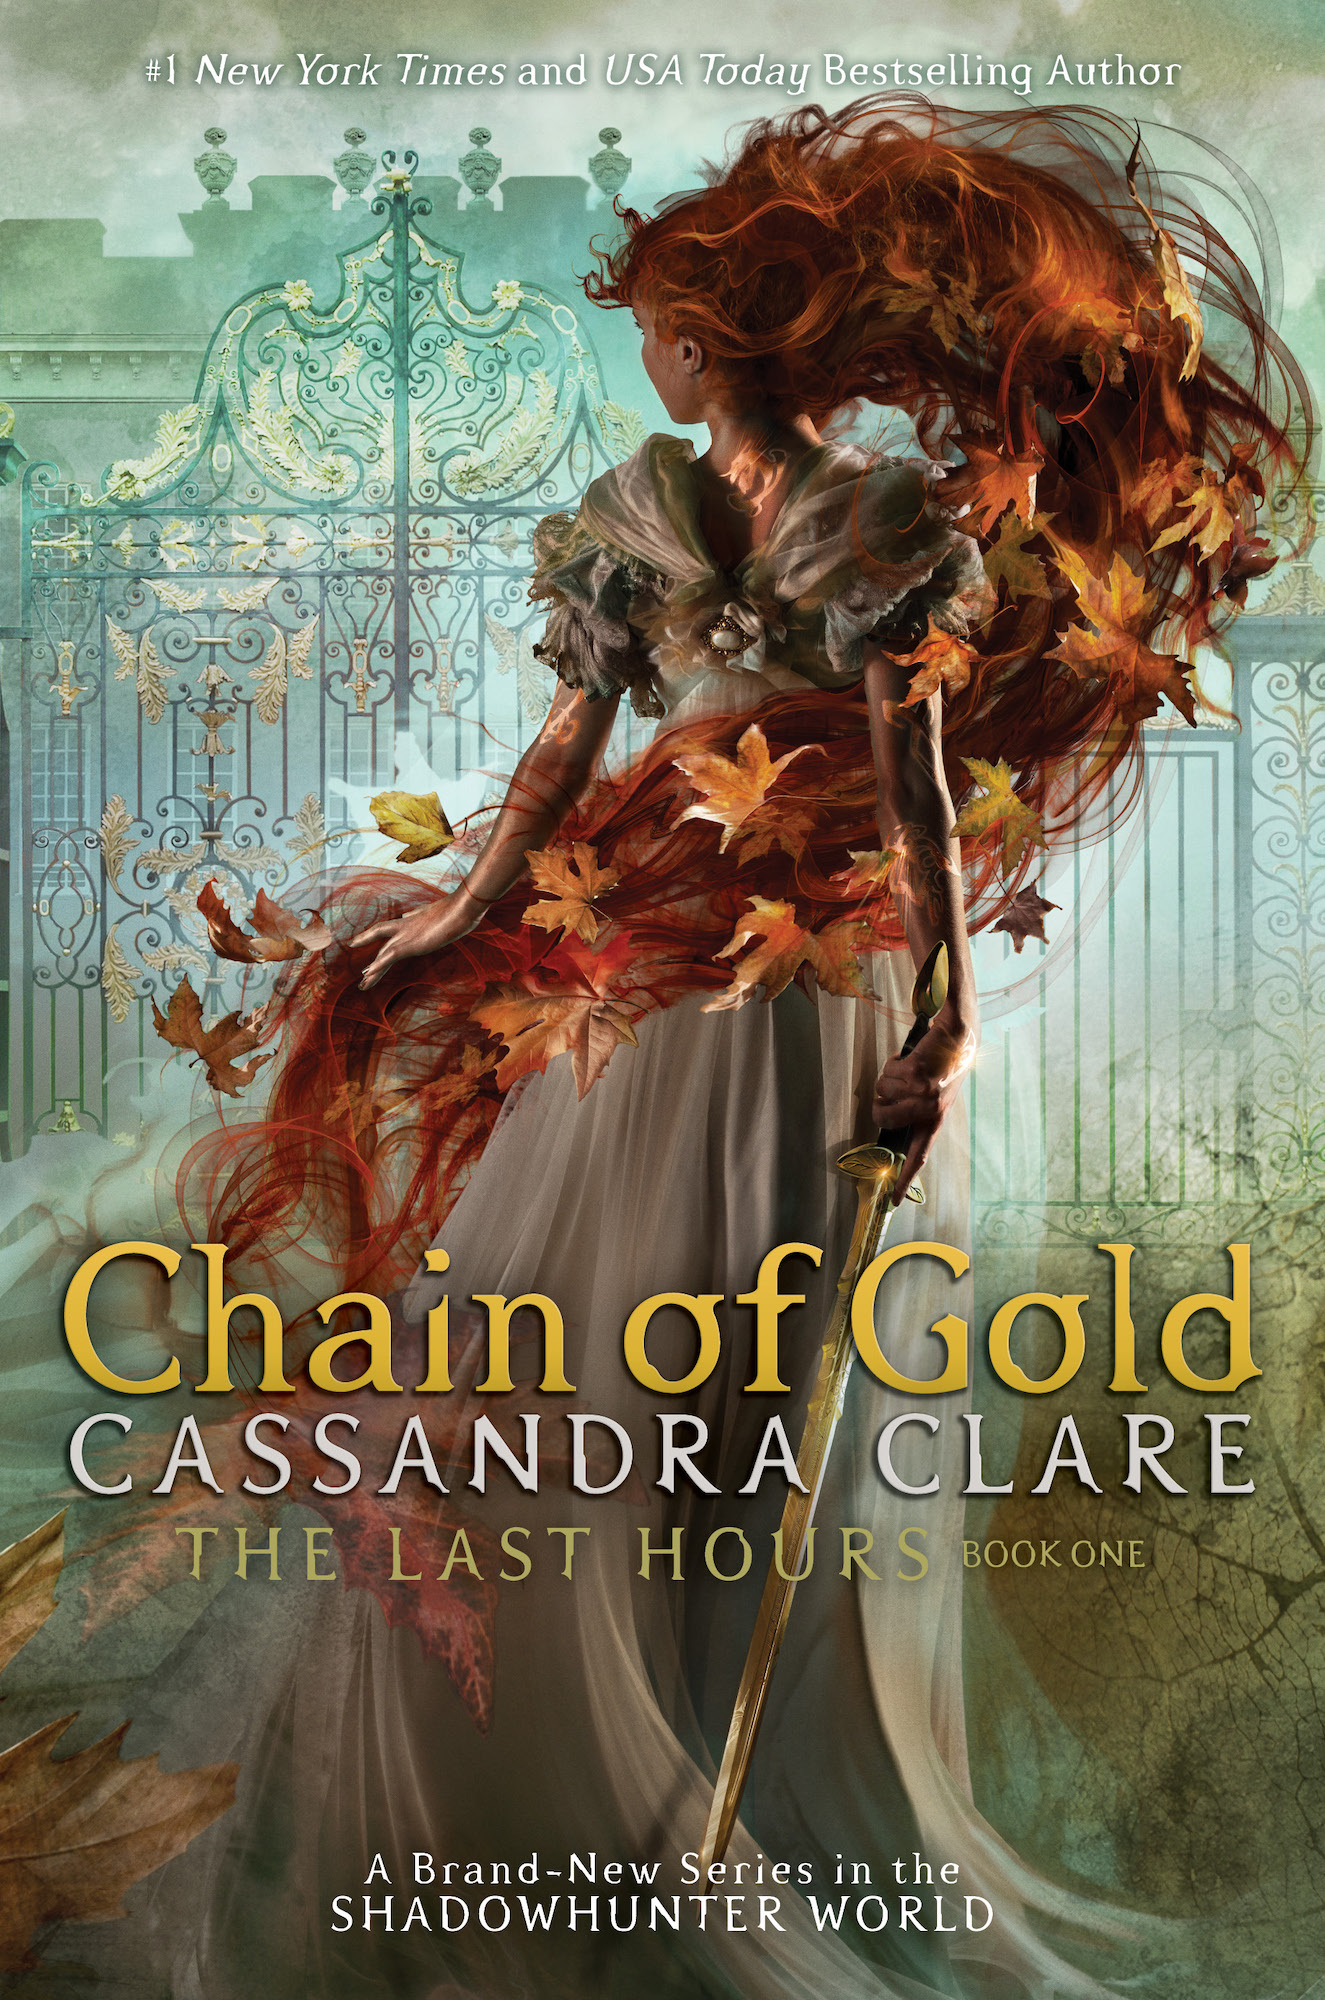 read-chain-of-gold-by-cassandra-clare-online-free-full-book-china-edition